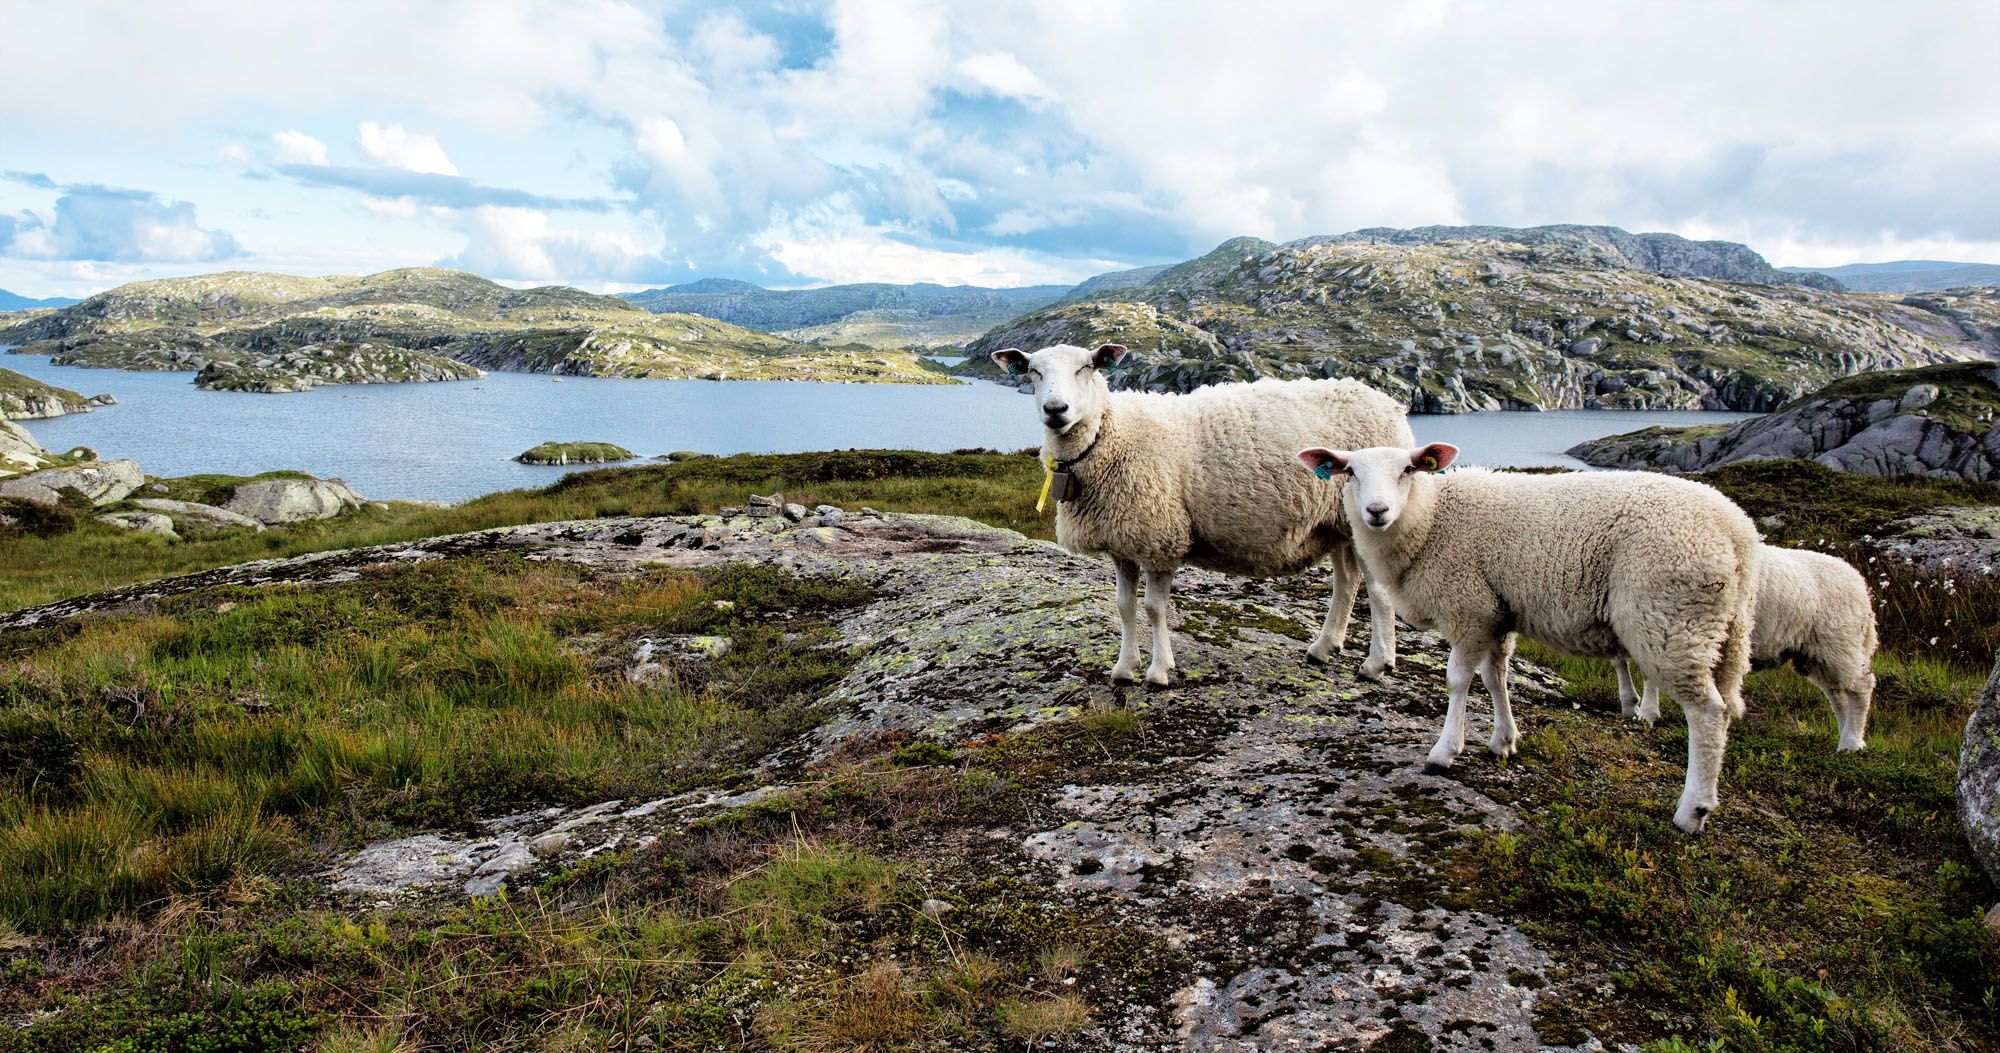 Featured image for “10 Day Norway Itinerary: Summer Road Trip through the Fjord Region”